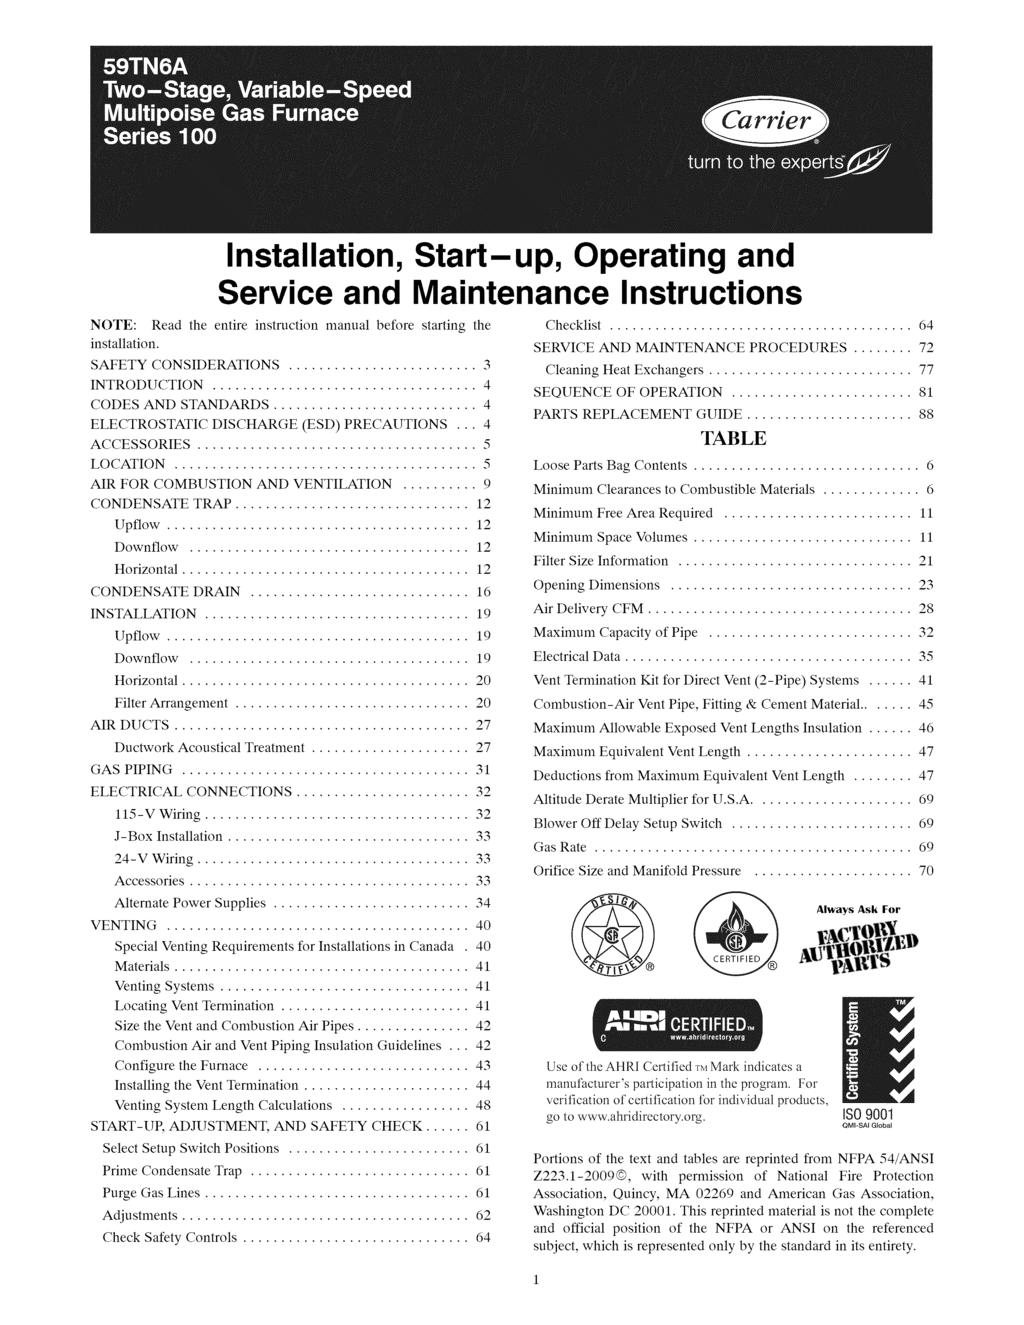 Installation, Start-up, Operating and Service and Maintenance Instructions NOTE: Read the entire instruction manual before starting the installation. SAFETY CONSIDERATIONS... 3 INTRODUCTION.